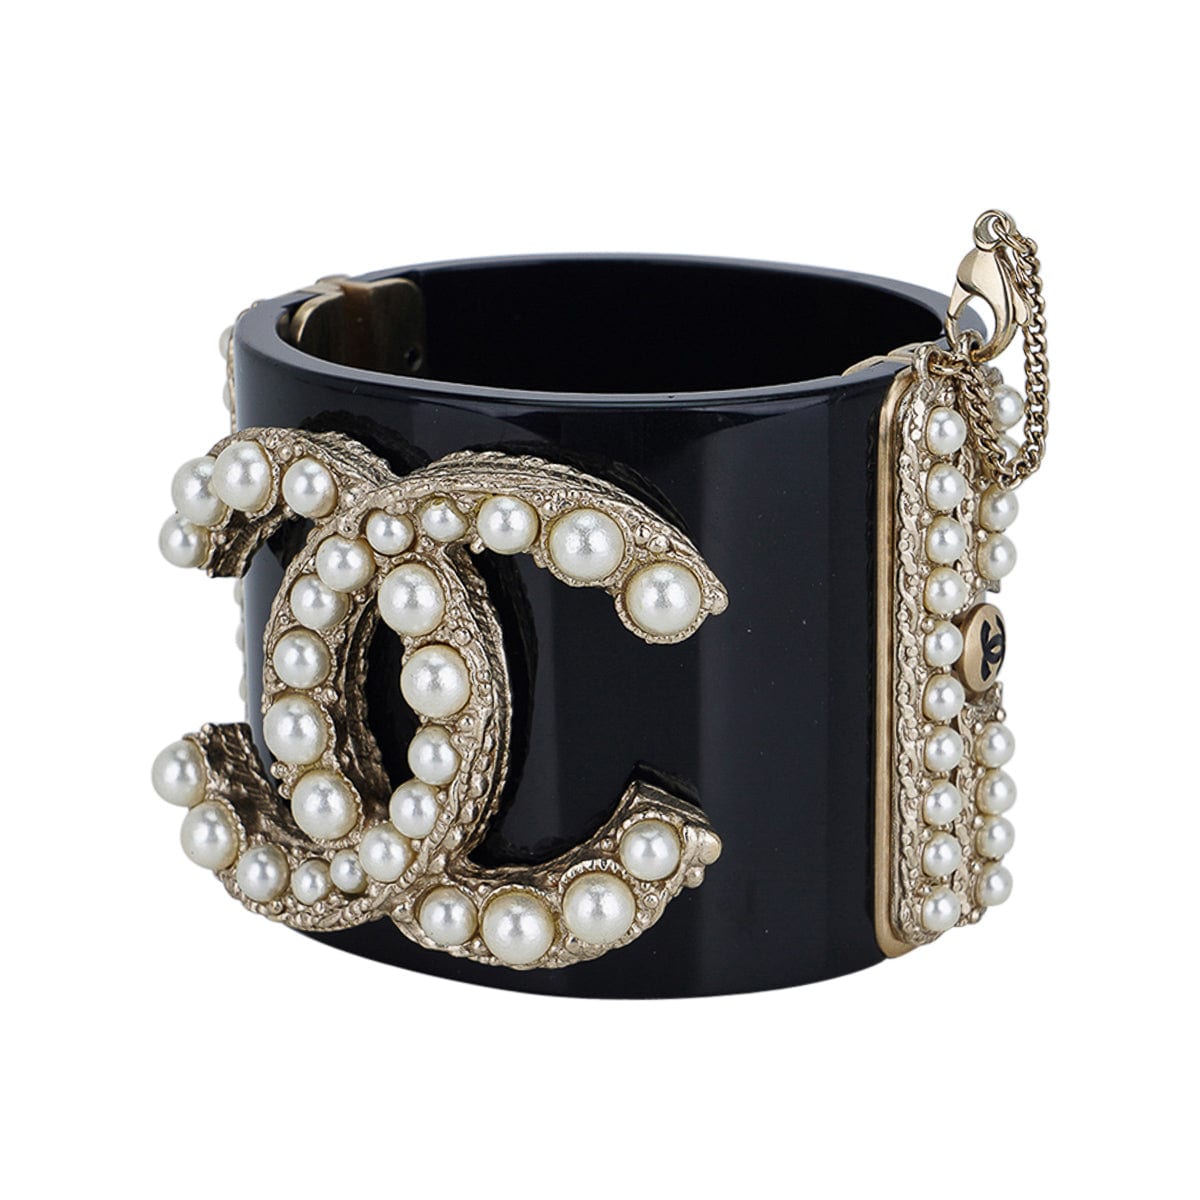 CHANEL, Jewelry, Chanel 8k Gold Plated Signature Bracelet